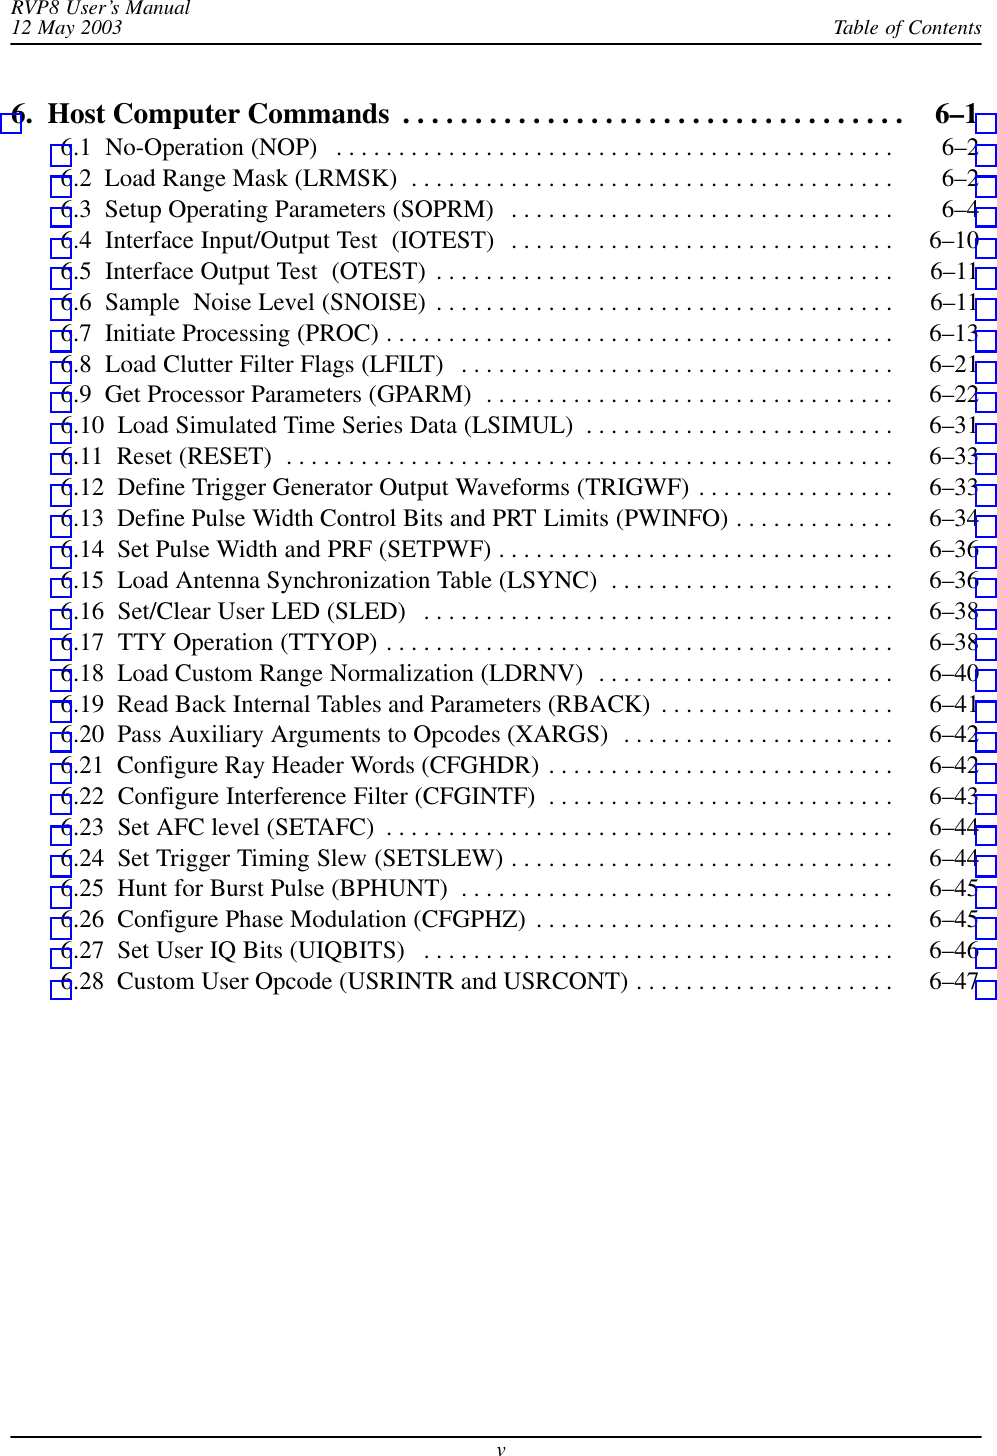 Table of ContentsRVP8 User’s Manual12 May 2003v6.  Host Computer Commands 6–1 . . . . . . . . . . . . . . . . . . . . . . . . . . . . . . . . . . . 6.1  No-Operation (NOP) 6–2 . . . . . . . . . . . . . . . . . . . . . . . . . . . . . . . . . . . . . . . . . . . . . 6.2  Load Range Mask (LRMSK) 6–2 . . . . . . . . . . . . . . . . . . . . . . . . . . . . . . . . . . . . . . . 6.3  Setup Operating Parameters (SOPRM) 6–4 . . . . . . . . . . . . . . . . . . . . . . . . . . . . . . . 6.4  Interface Input/Output Test  (IOTEST) 6–10 . . . . . . . . . . . . . . . . . . . . . . . . . . . . . . . 6.5  Interface Output Test  (OTEST) 6–11 . . . . . . . . . . . . . . . . . . . . . . . . . . . . . . . . . . . . . 6.6  Sample  Noise Level (SNOISE) 6–11 . . . . . . . . . . . . . . . . . . . . . . . . . . . . . . . . . . . . . 6.7  Initiate Processing (PROC) 6–13 . . . . . . . . . . . . . . . . . . . . . . . . . . . . . . . . . . . . . . . . . 6.8  Load Clutter Filter Flags (LFILT) 6–21 . . . . . . . . . . . . . . . . . . . . . . . . . . . . . . . . . . . 6.9  Get Processor Parameters (GPARM) 6–22 . . . . . . . . . . . . . . . . . . . . . . . . . . . . . . . . . 6.10  Load Simulated Time Series Data (LSIMUL) 6–31 . . . . . . . . . . . . . . . . . . . . . . . . . 6.11  Reset (RESET) 6–33 . . . . . . . . . . . . . . . . . . . . . . . . . . . . . . . . . . . . . . . . . . . . . . . . . 6.12  Define Trigger Generator Output Waveforms (TRIGWF) 6–33 . . . . . . . . . . . . . . . . 6.13  Define Pulse Width Control Bits and PRT Limits (PWINFO) 6–34 . . . . . . . . . . . . . 6.14  Set Pulse Width and PRF (SETPWF) 6–36 . . . . . . . . . . . . . . . . . . . . . . . . . . . . . . . . 6.15  Load Antenna Synchronization Table (LSYNC) 6–36 . . . . . . . . . . . . . . . . . . . . . . . 6.16  Set/Clear User LED (SLED) 6–38 . . . . . . . . . . . . . . . . . . . . . . . . . . . . . . . . . . . . . . 6.17  TTY Operation (TTYOP) 6–38 . . . . . . . . . . . . . . . . . . . . . . . . . . . . . . . . . . . . . . . . . 6.18  Load Custom Range Normalization (LDRNV) 6–40 . . . . . . . . . . . . . . . . . . . . . . . . 6.19  Read Back Internal Tables and Parameters (RBACK) 6–41 . . . . . . . . . . . . . . . . . . . 6.20  Pass Auxiliary Arguments to Opcodes (XARGS) 6–42 . . . . . . . . . . . . . . . . . . . . . . 6.21  Configure Ray Header Words (CFGHDR) 6–42 . . . . . . . . . . . . . . . . . . . . . . . . . . . . 6.22  Configure Interference Filter (CFGINTF) 6–43 . . . . . . . . . . . . . . . . . . . . . . . . . . . . 6.23  Set AFC level (SETAFC) 6–44 . . . . . . . . . . . . . . . . . . . . . . . . . . . . . . . . . . . . . . . . . 6.24  Set Trigger Timing Slew (SETSLEW) 6–44 . . . . . . . . . . . . . . . . . . . . . . . . . . . . . . . 6.25  Hunt for Burst Pulse (BPHUNT) 6–45 . . . . . . . . . . . . . . . . . . . . . . . . . . . . . . . . . . . 6.26  Configure Phase Modulation (CFGPHZ) 6–45 . . . . . . . . . . . . . . . . . . . . . . . . . . . . . 6.27  Set User IQ Bits (UIQBITS) 6–46 . . . . . . . . . . . . . . . . . . . . . . . . . . . . . . . . . . . . . . 6.28  Custom User Opcode (USRINTR and USRCONT) 6–47 . . . . . . . . . . . . . . . . . . . . . 